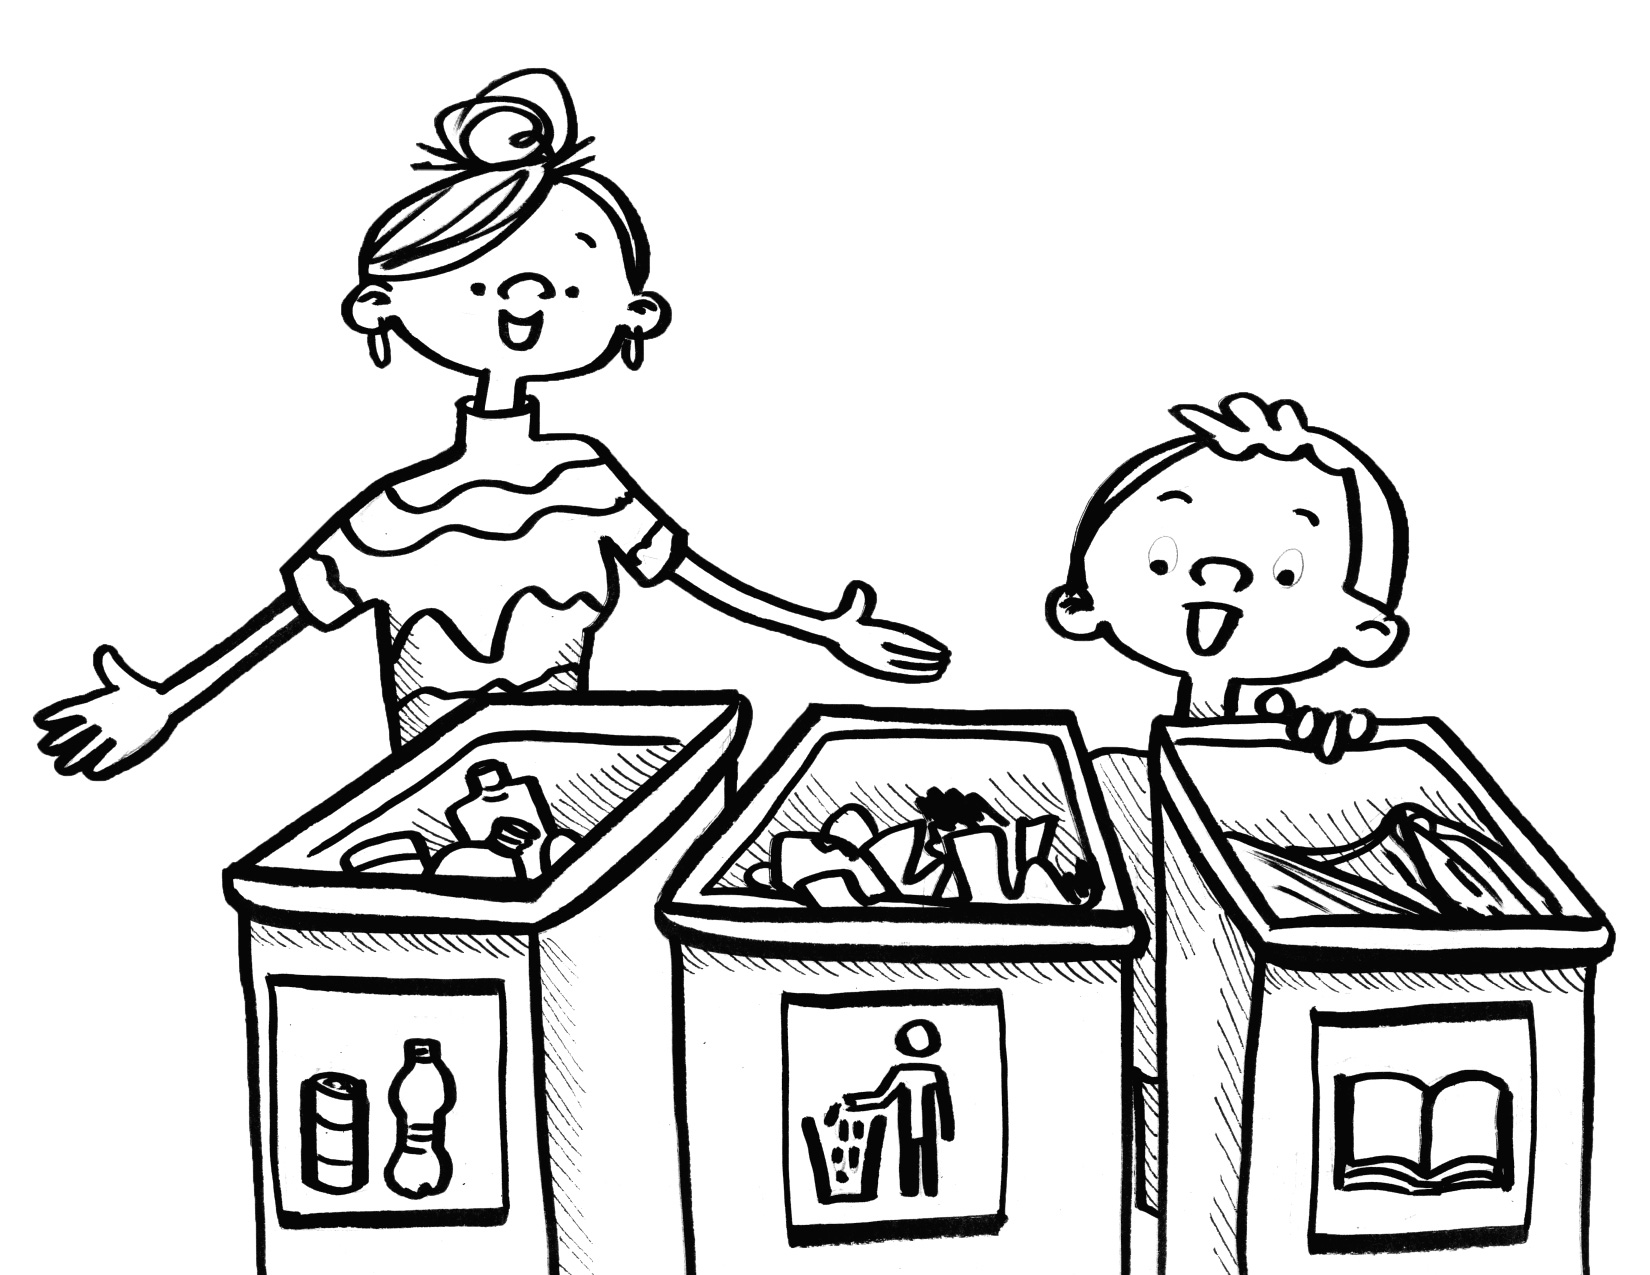 Coloring page of a mom and child behind recycling bins